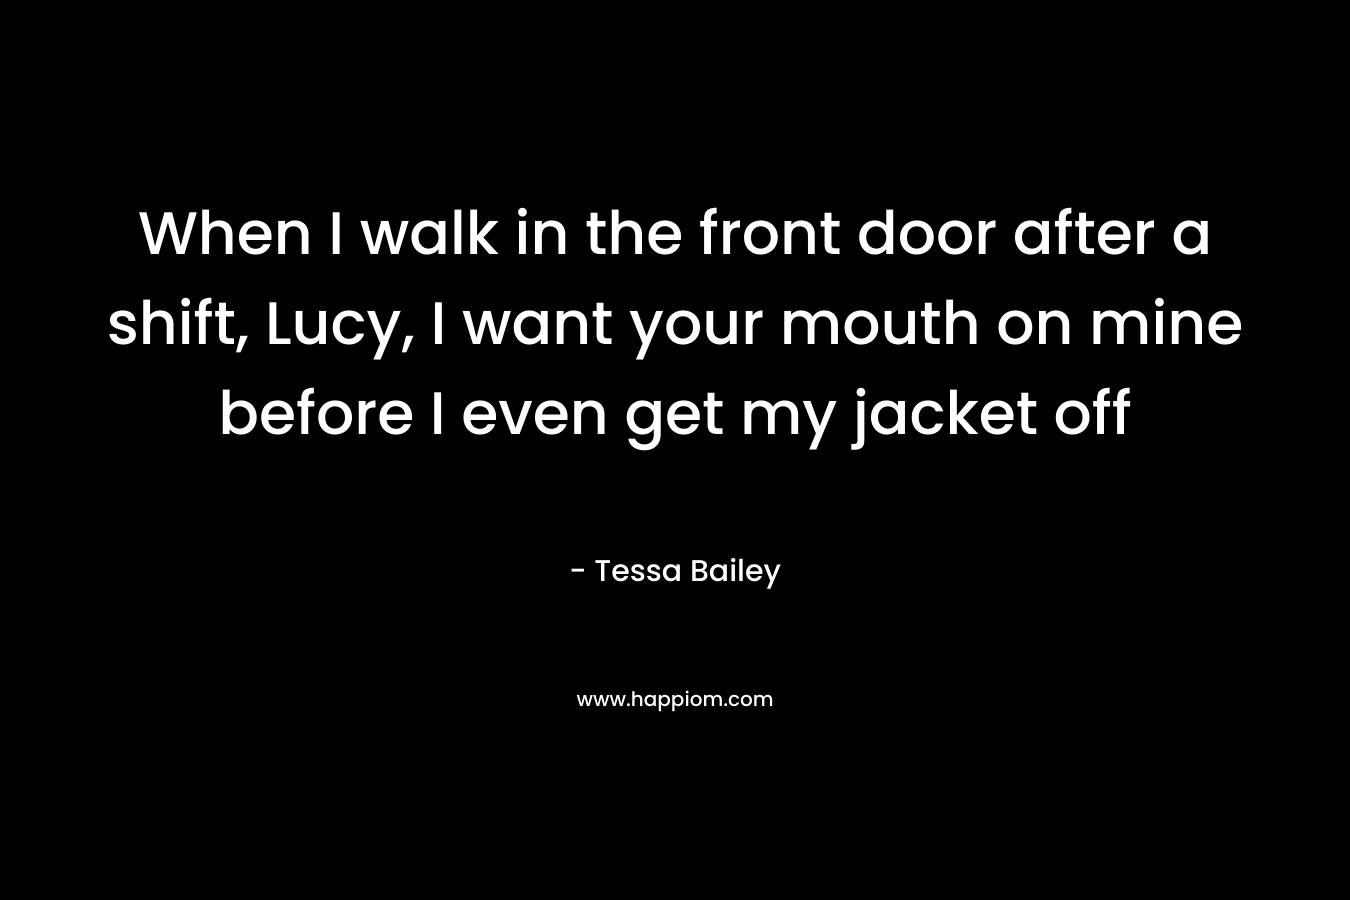 When I walk in the front door after a shift, Lucy, I want your mouth on mine before I even get my jacket off – Tessa Bailey